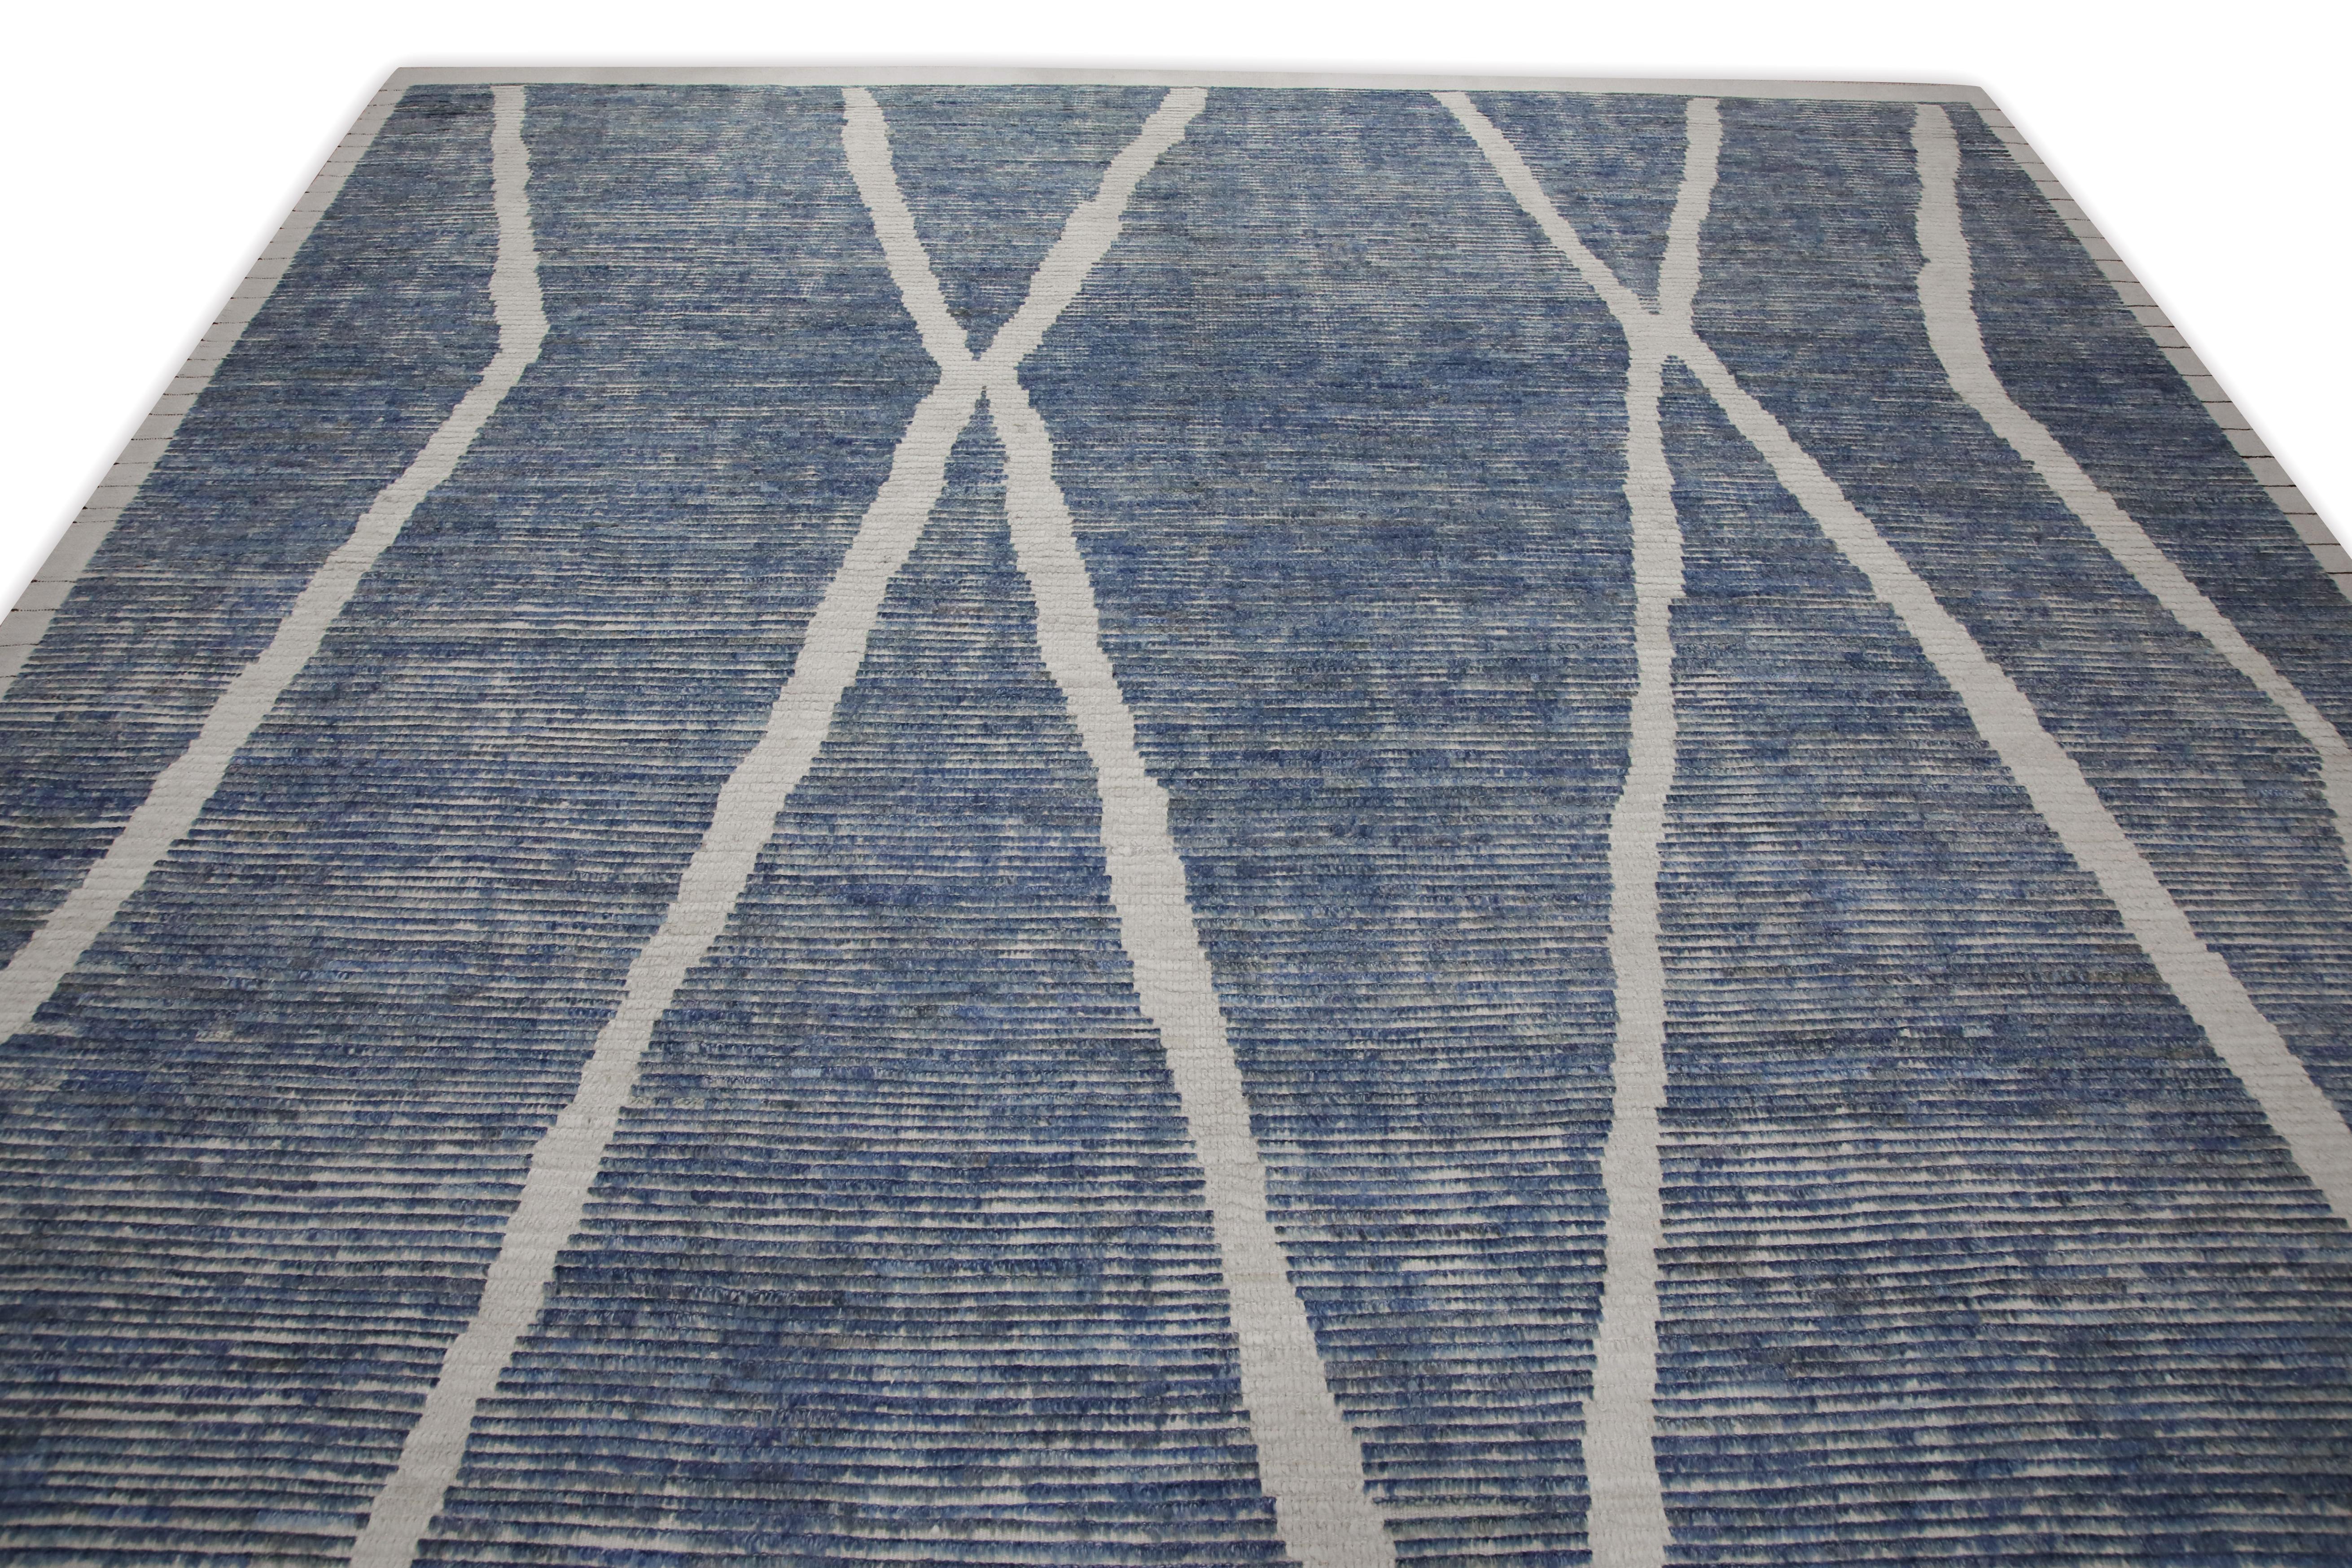 Vegetable Dyed Blue & White 21st Century Modern Moroccan Style Wool Rug 9'8